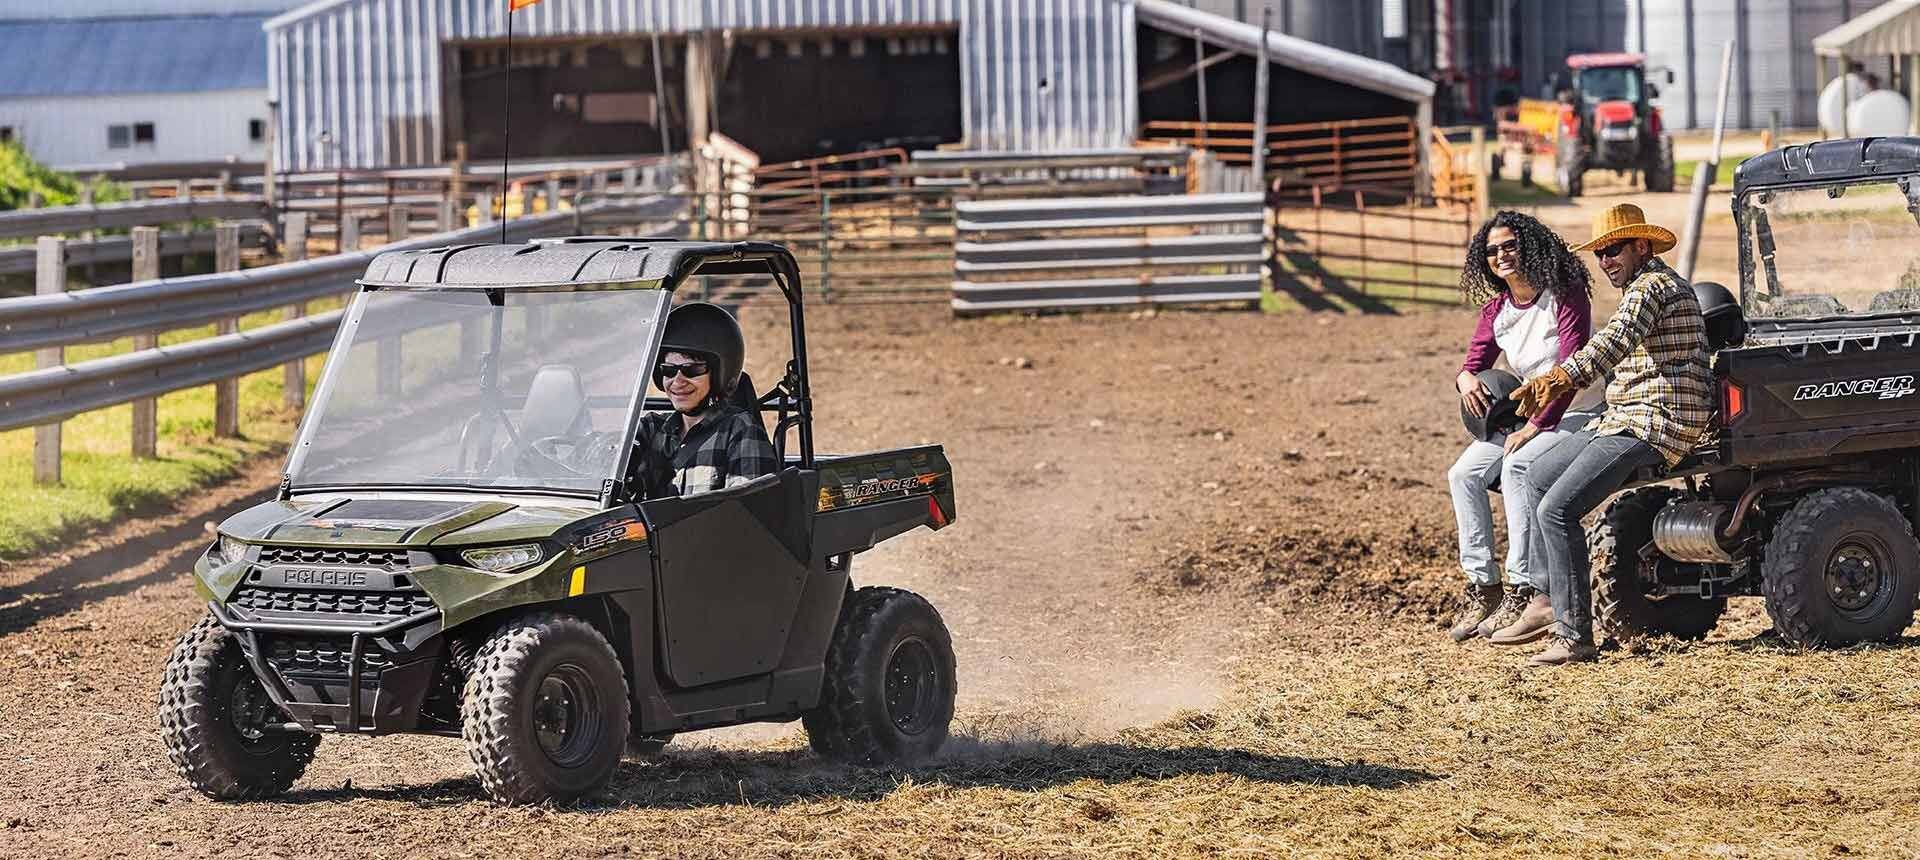 There aren’t a ton of quality options for getting your kids into UTVs safely, but we’ve rounded up five that we think fit the bill nicely.